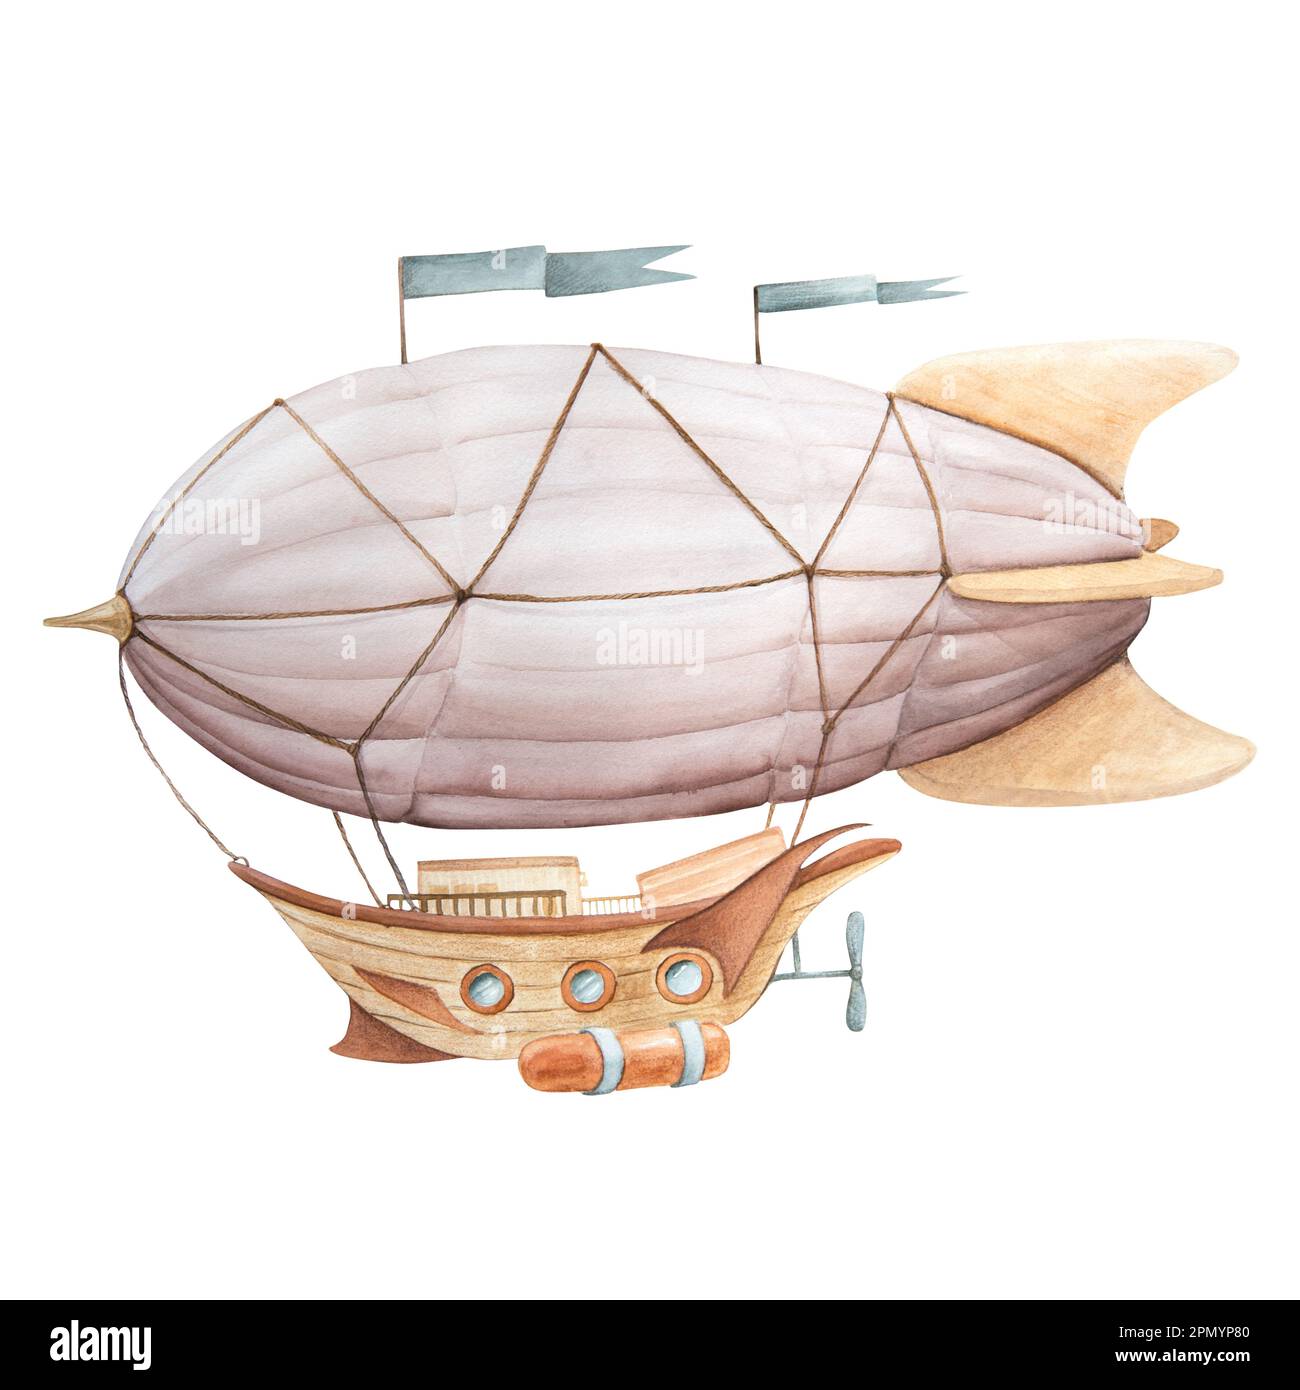 Watercolor illustration of a dirigible isolated on a white background. Vintage cartoon airship with flags in brown, pink and turquoise colors. Can be Stock Photo